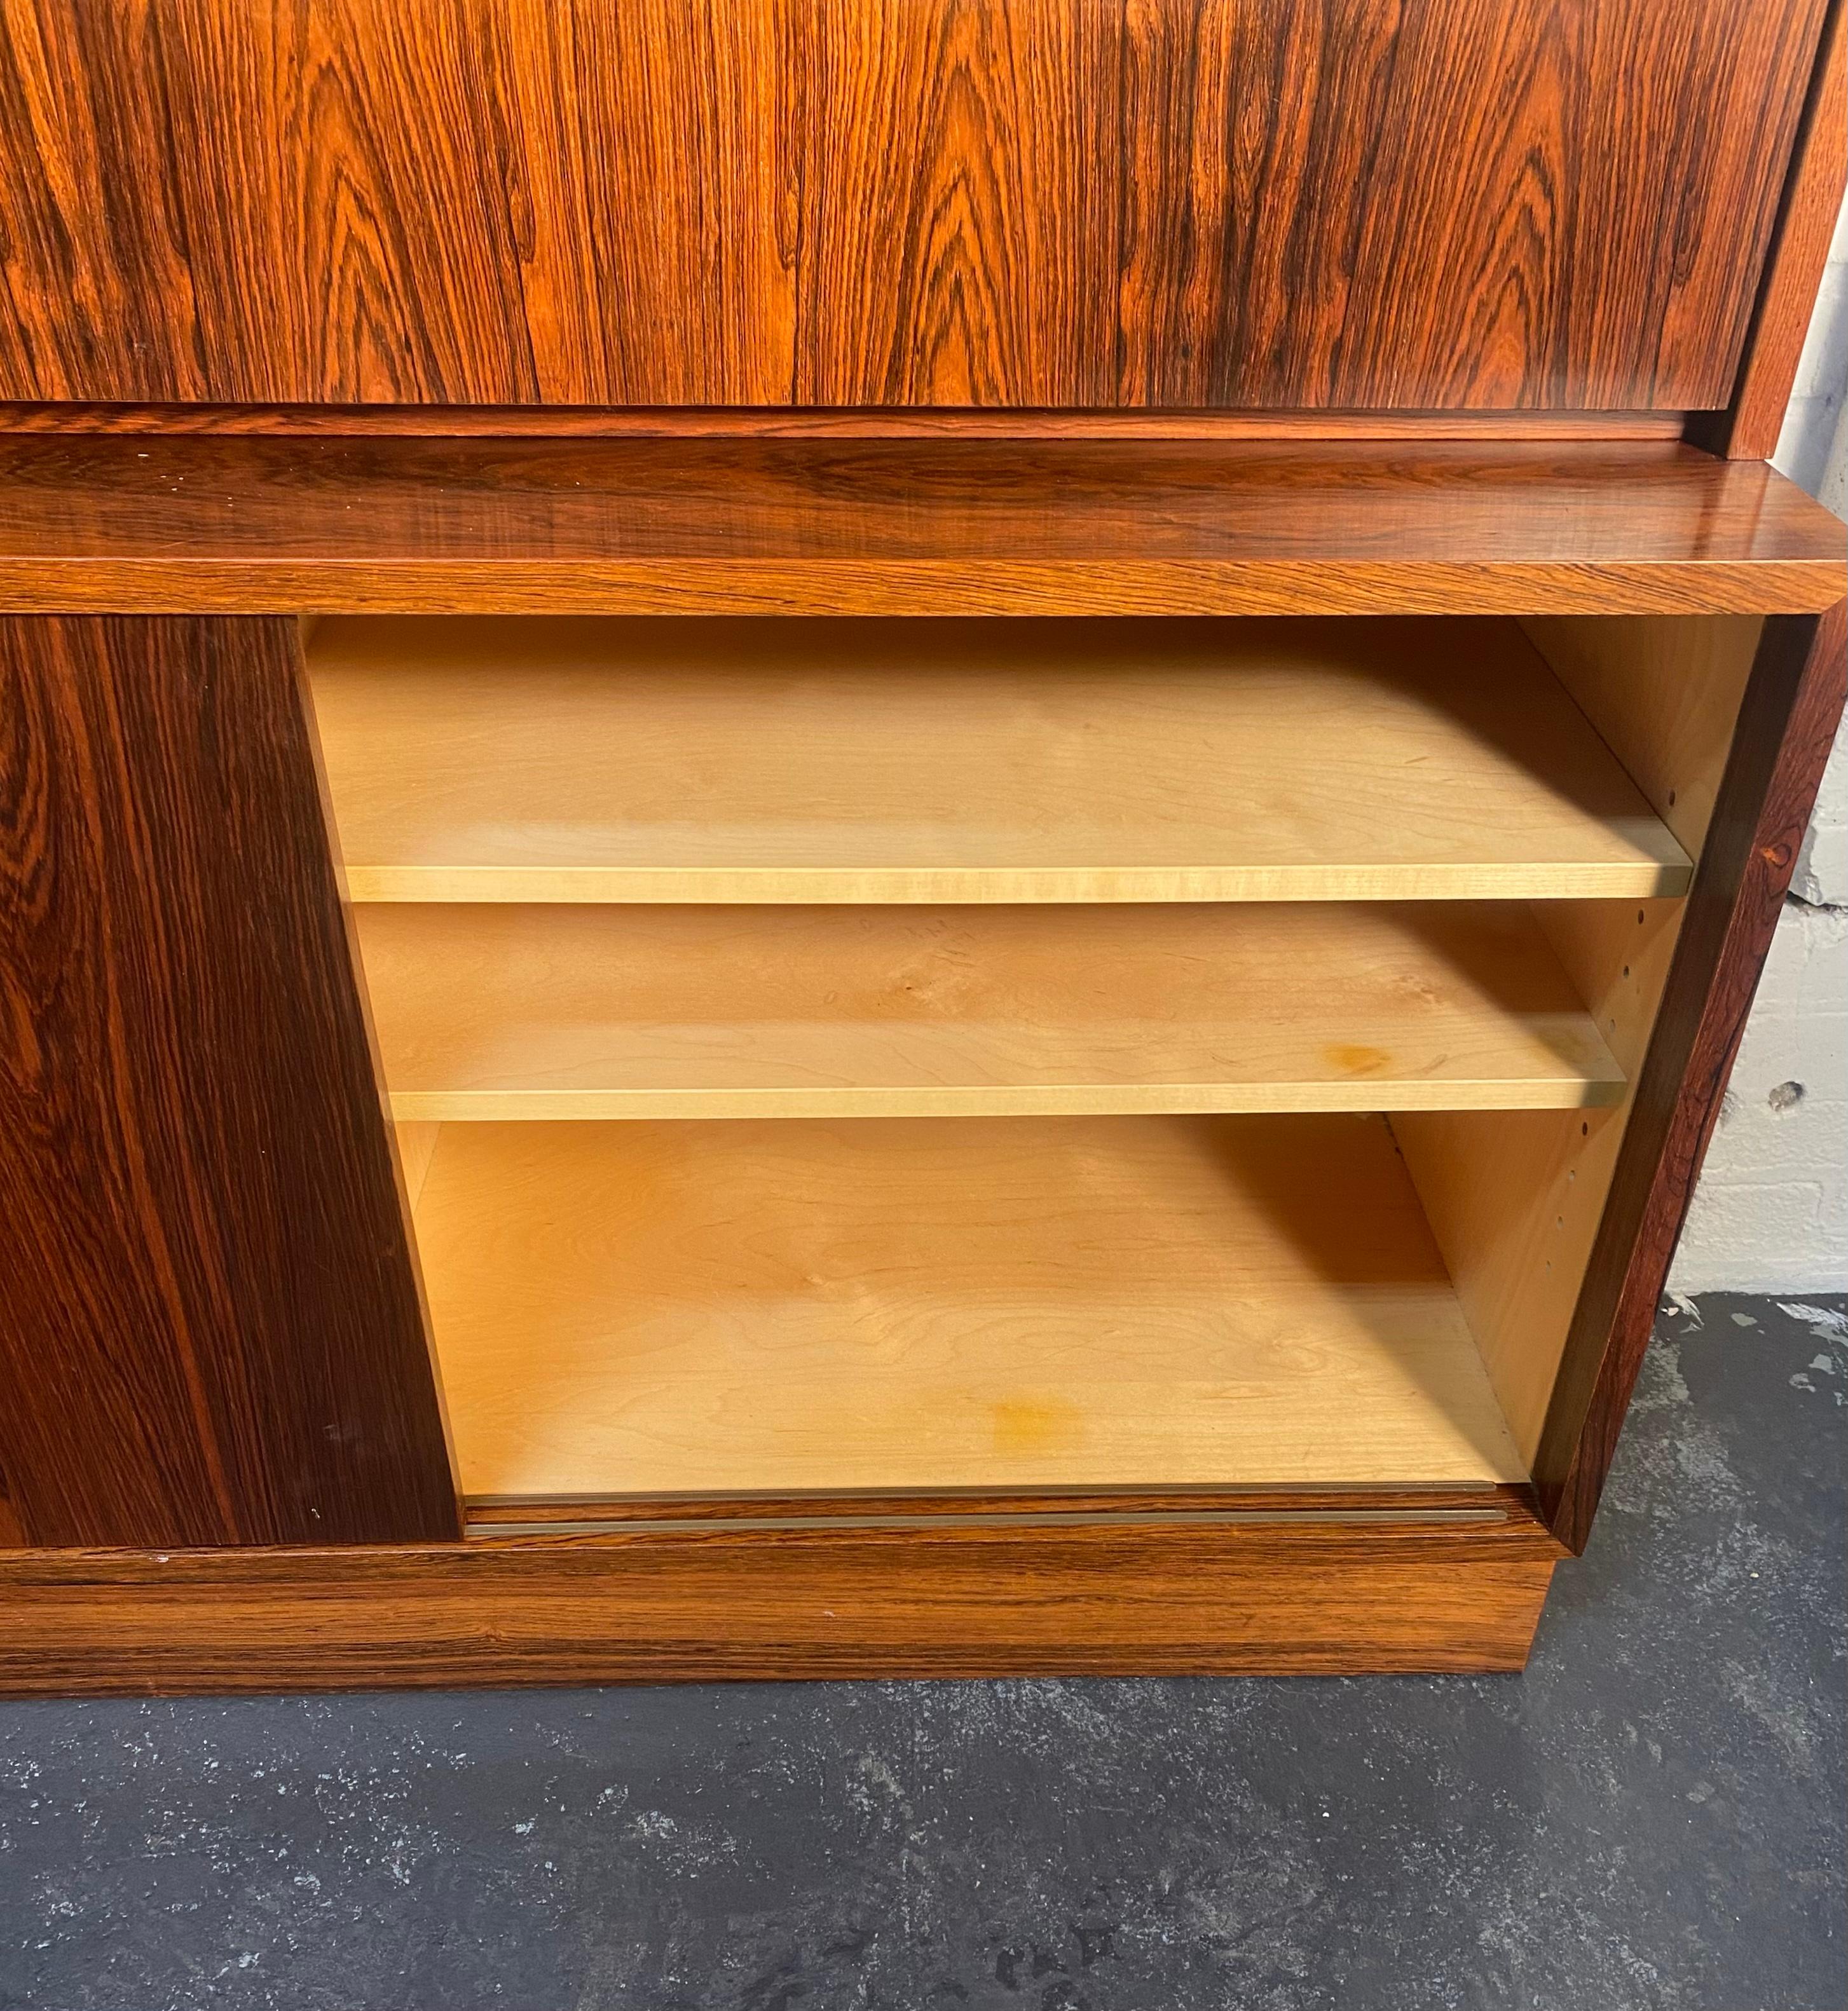 Danish modern, two piece, book matched rosewood, bookcase secretary cabinet by Poul Hundevad ... Birch wood interior,,, features a 26 inch height bottom cabinet with sliding doors, adjustable shelves and green felt lined, pull-out drawer. The 12